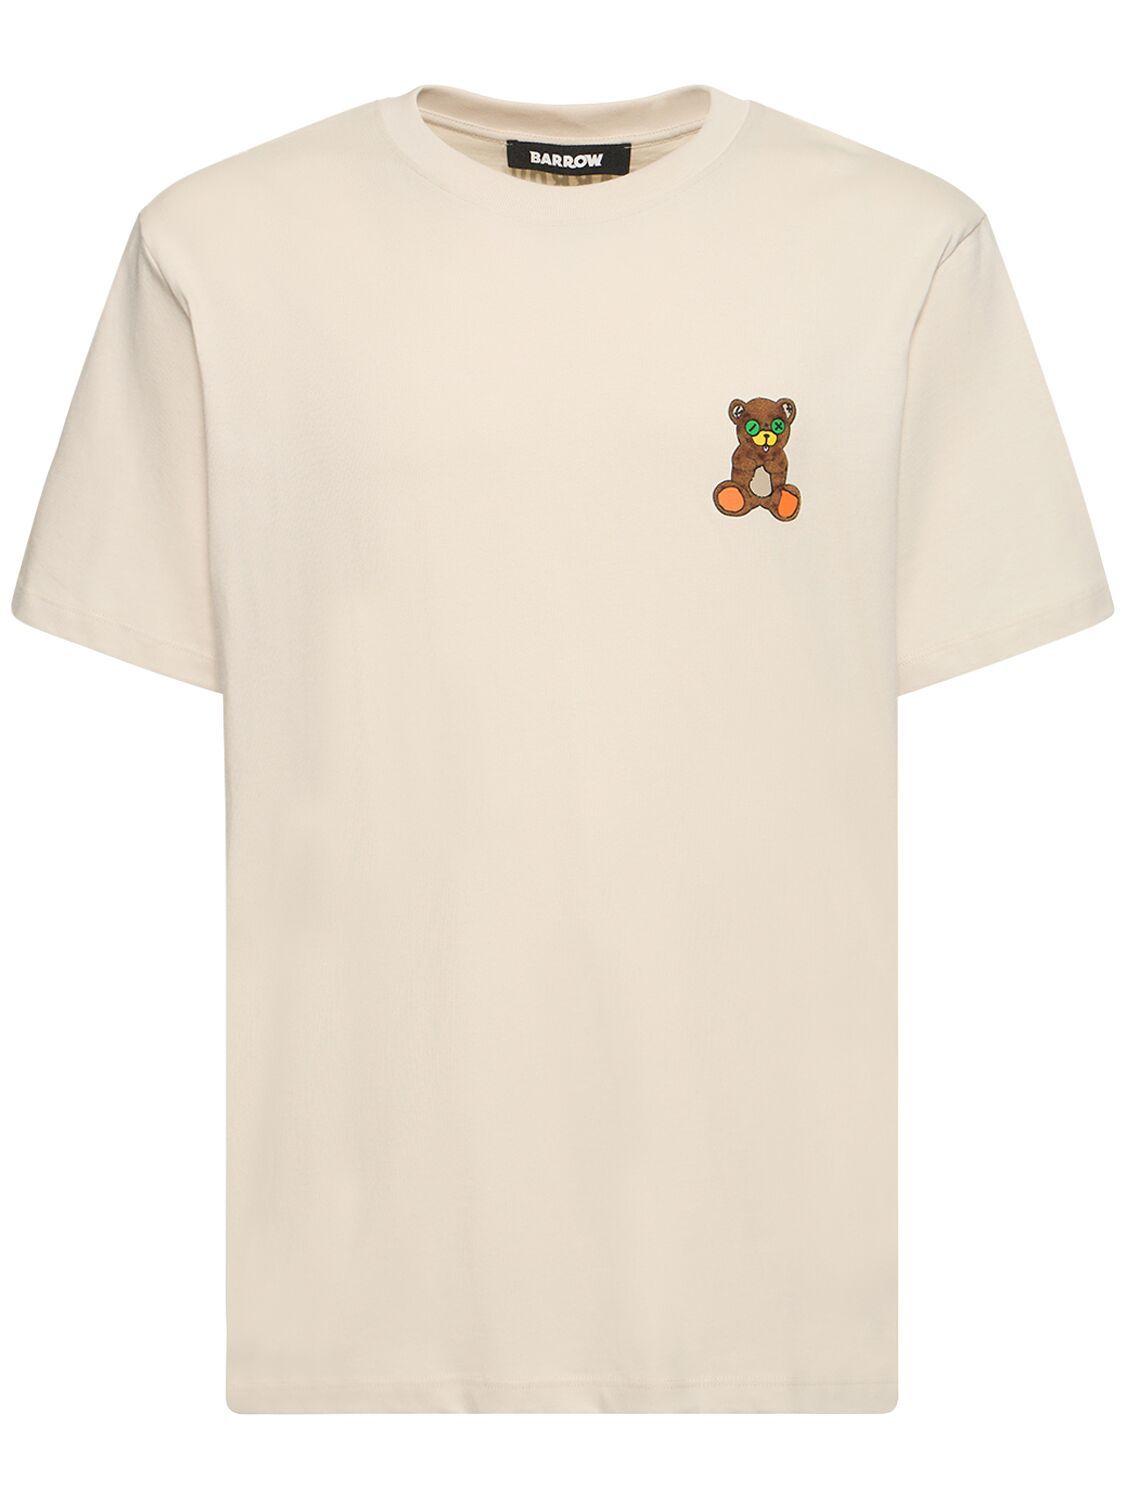 Barrow Bear Printed Cotton T-shirt in Natural for Men | Lyst